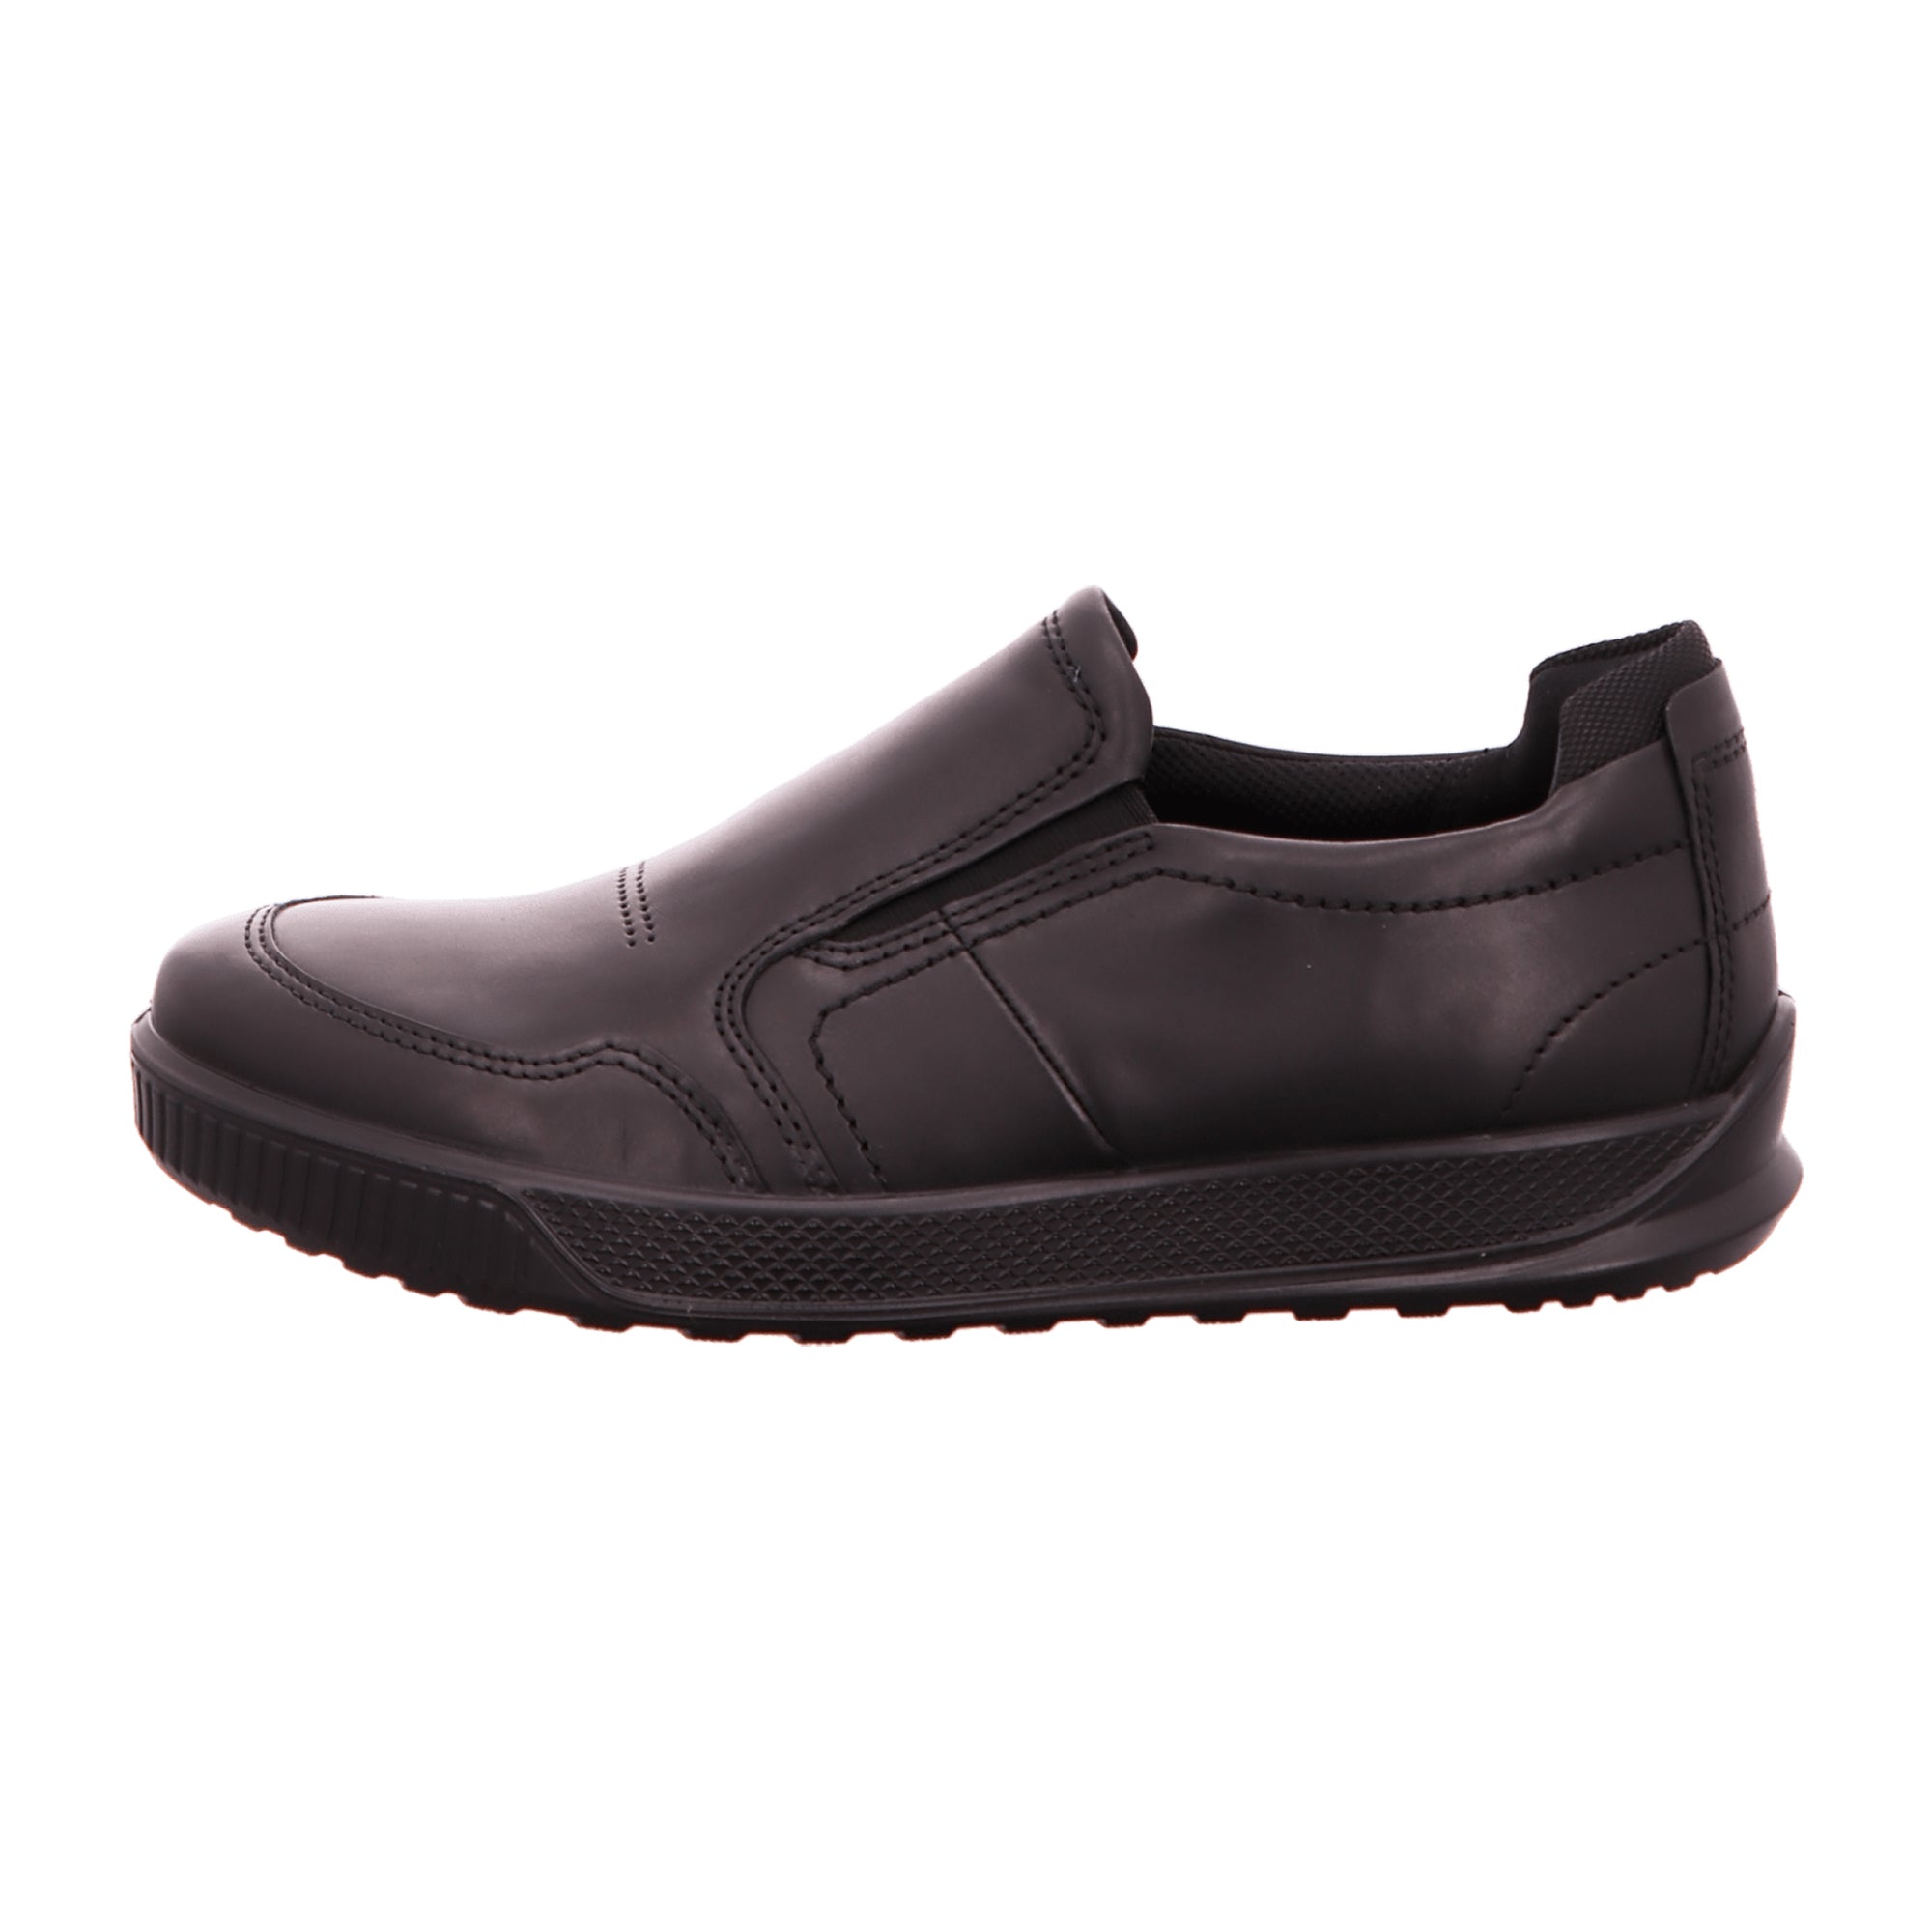 Ecco Byway Men's Casual Shoes, Black - Durable & Stylish